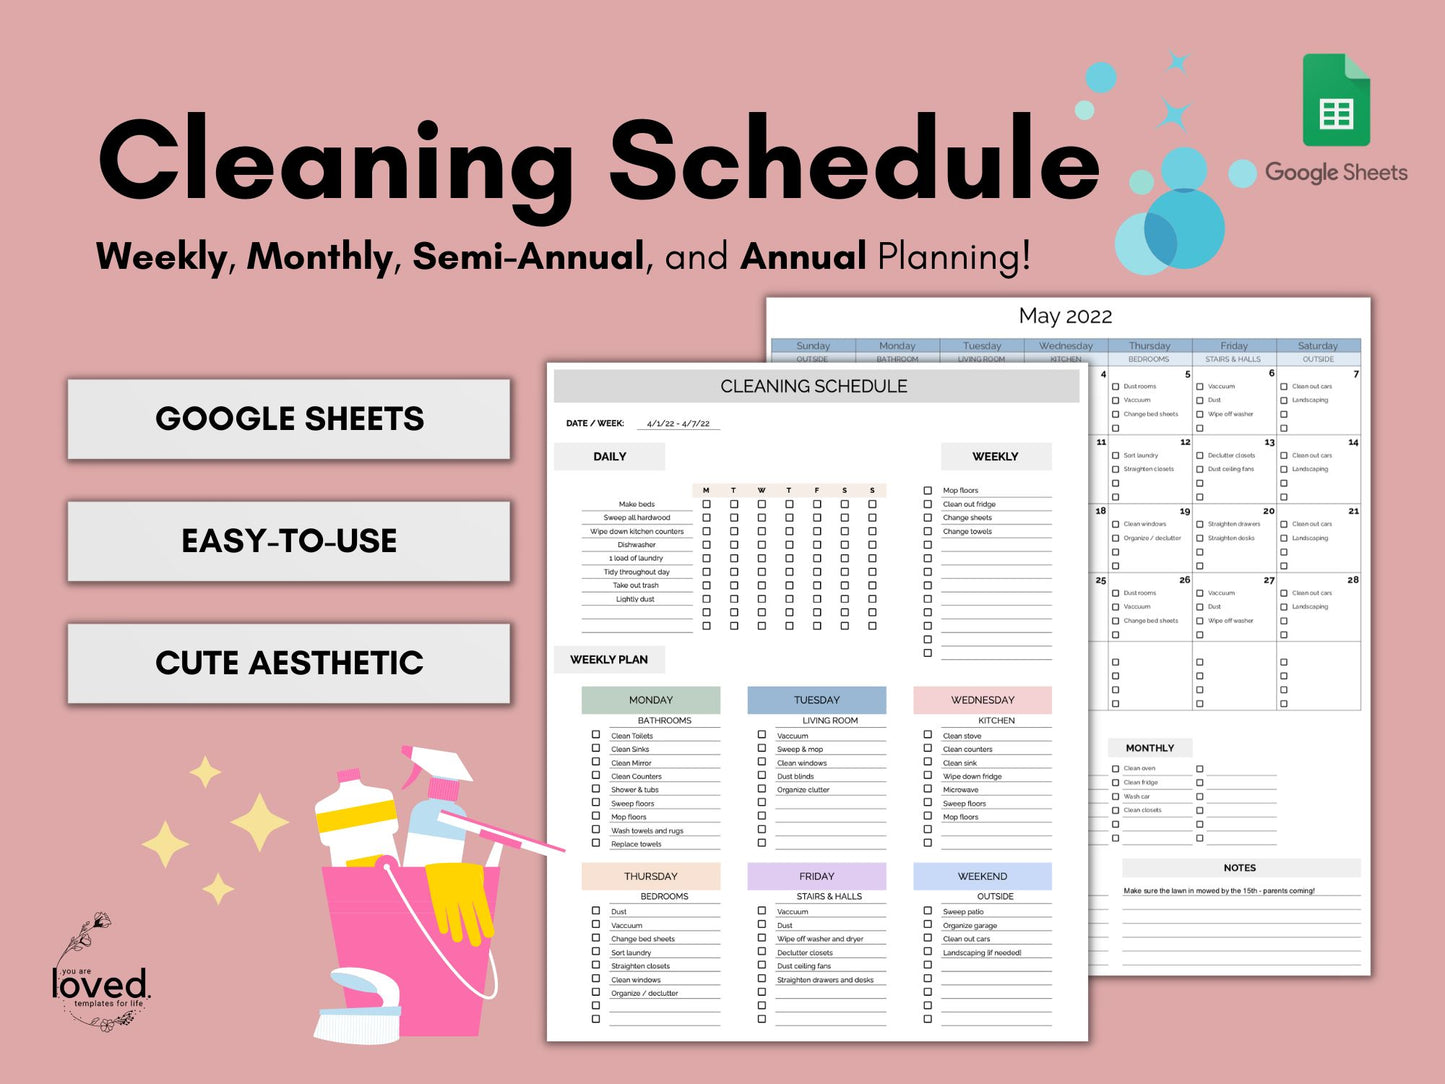 Cleaning Schedule Checklist | Weekly, Monthly, Semi-Annual, & Annual Planning | Google Sheets Template